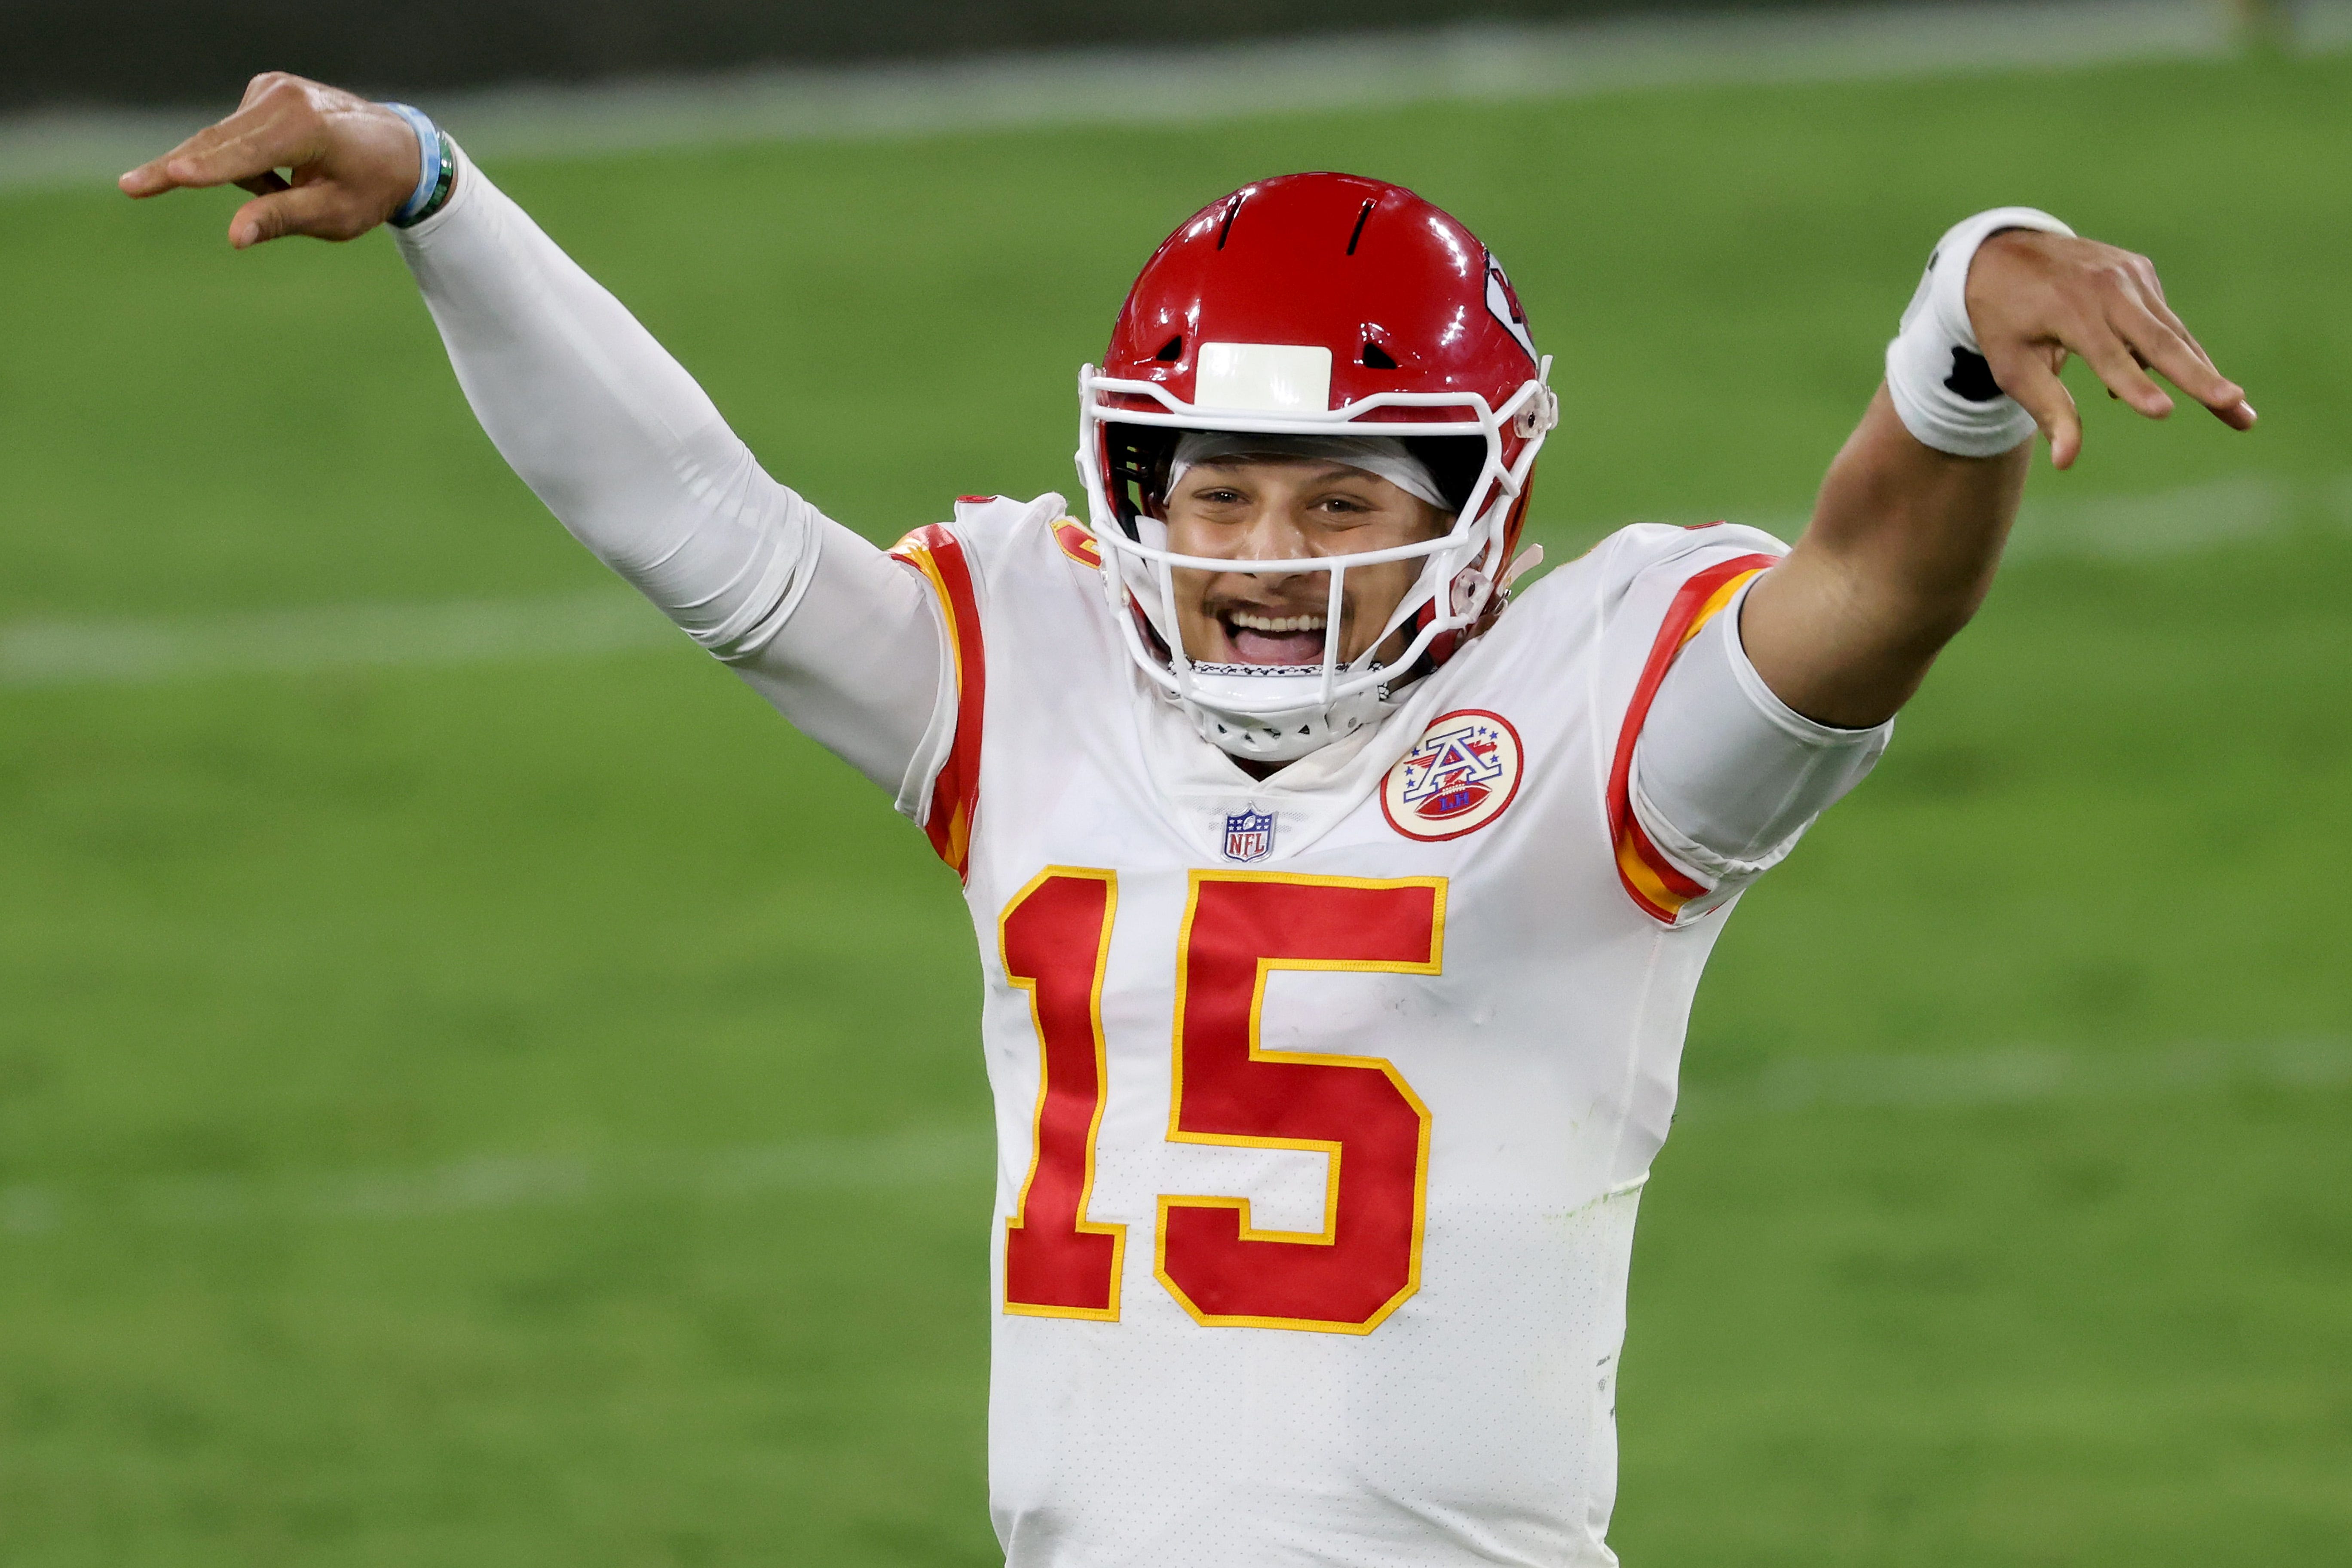 Opinion: Patrick Mahomes, Chiefs prove they're in separate class from Ravens, rest of NFL